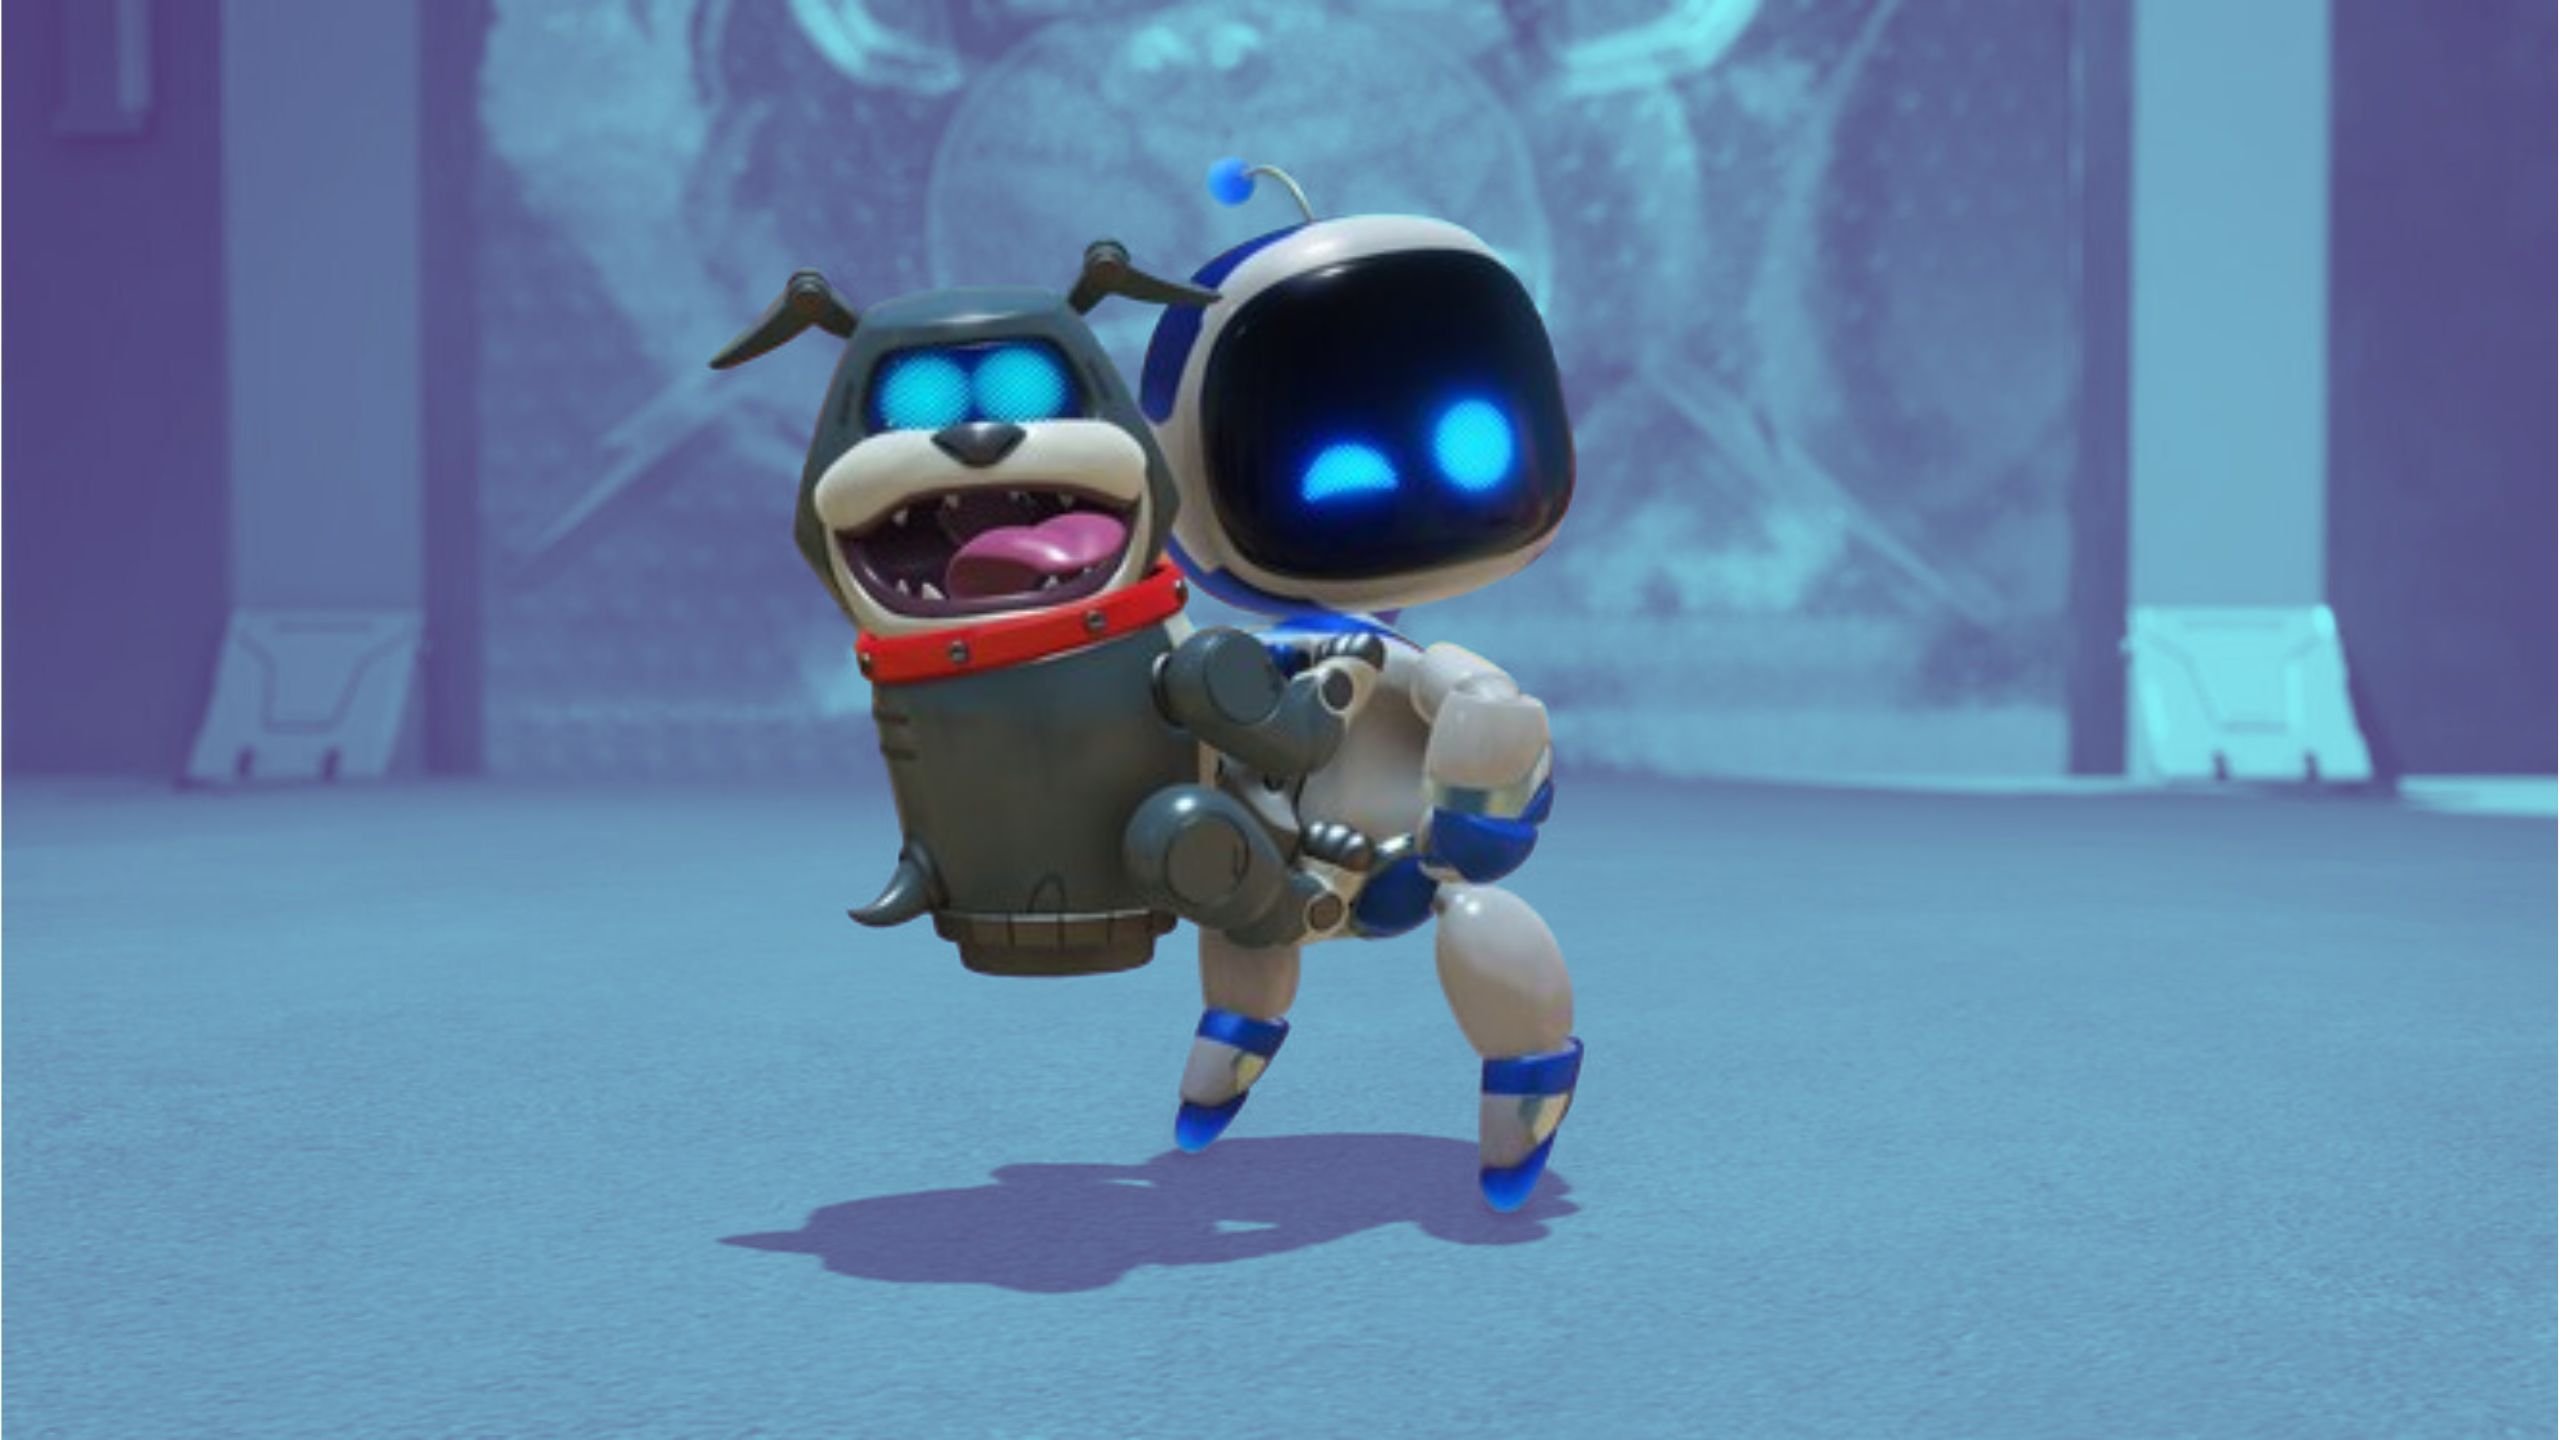 Astro Bot is my most anticipated game of the year